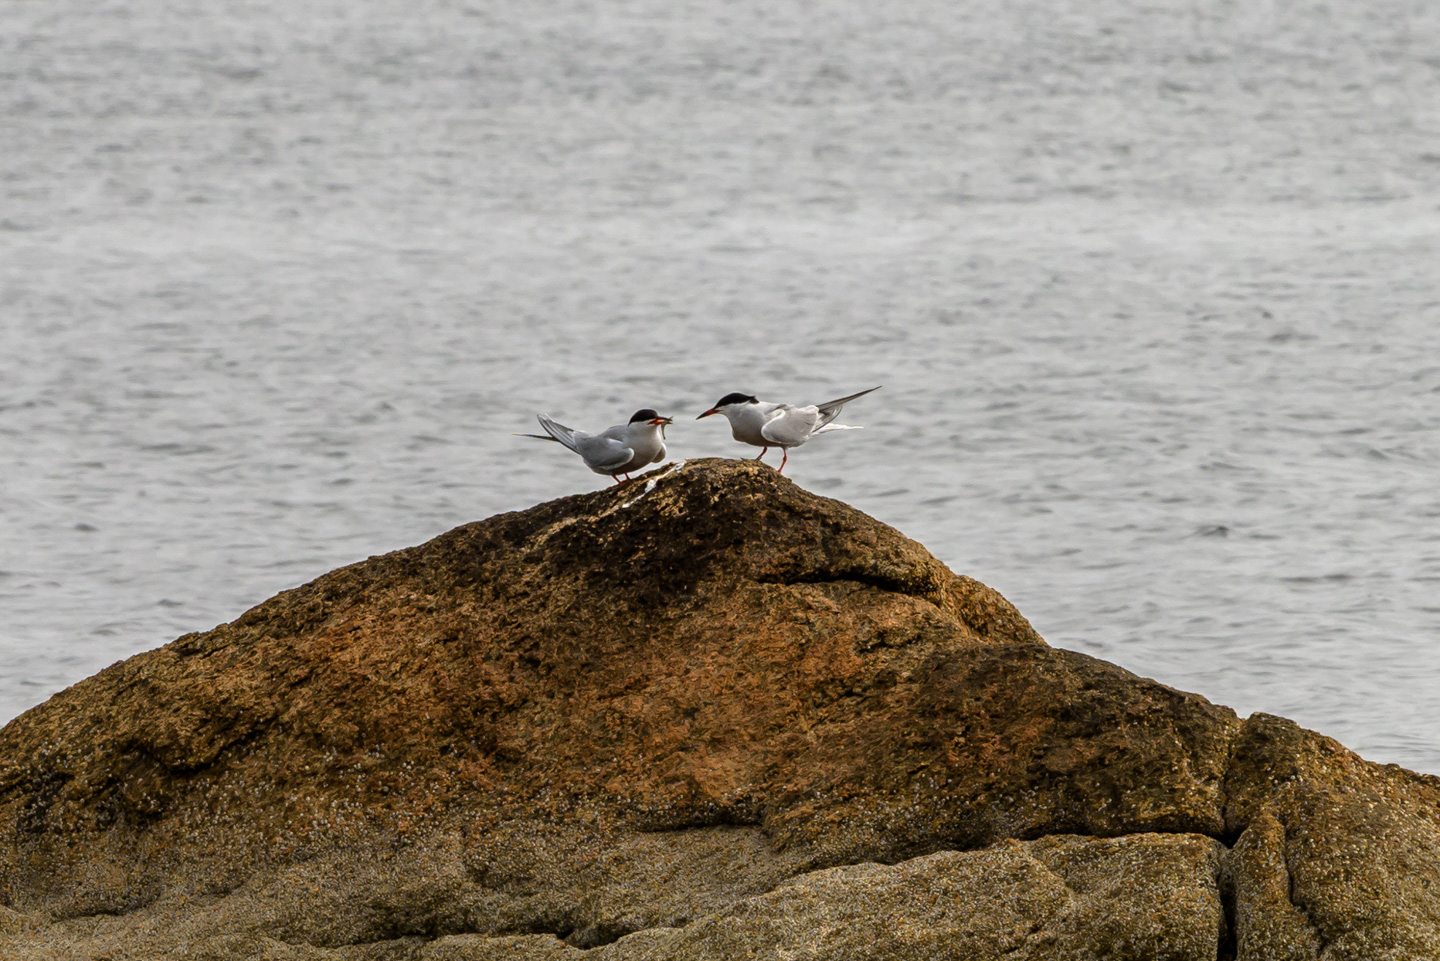 Common Terns on a rock, one of which has a fish in its beak.